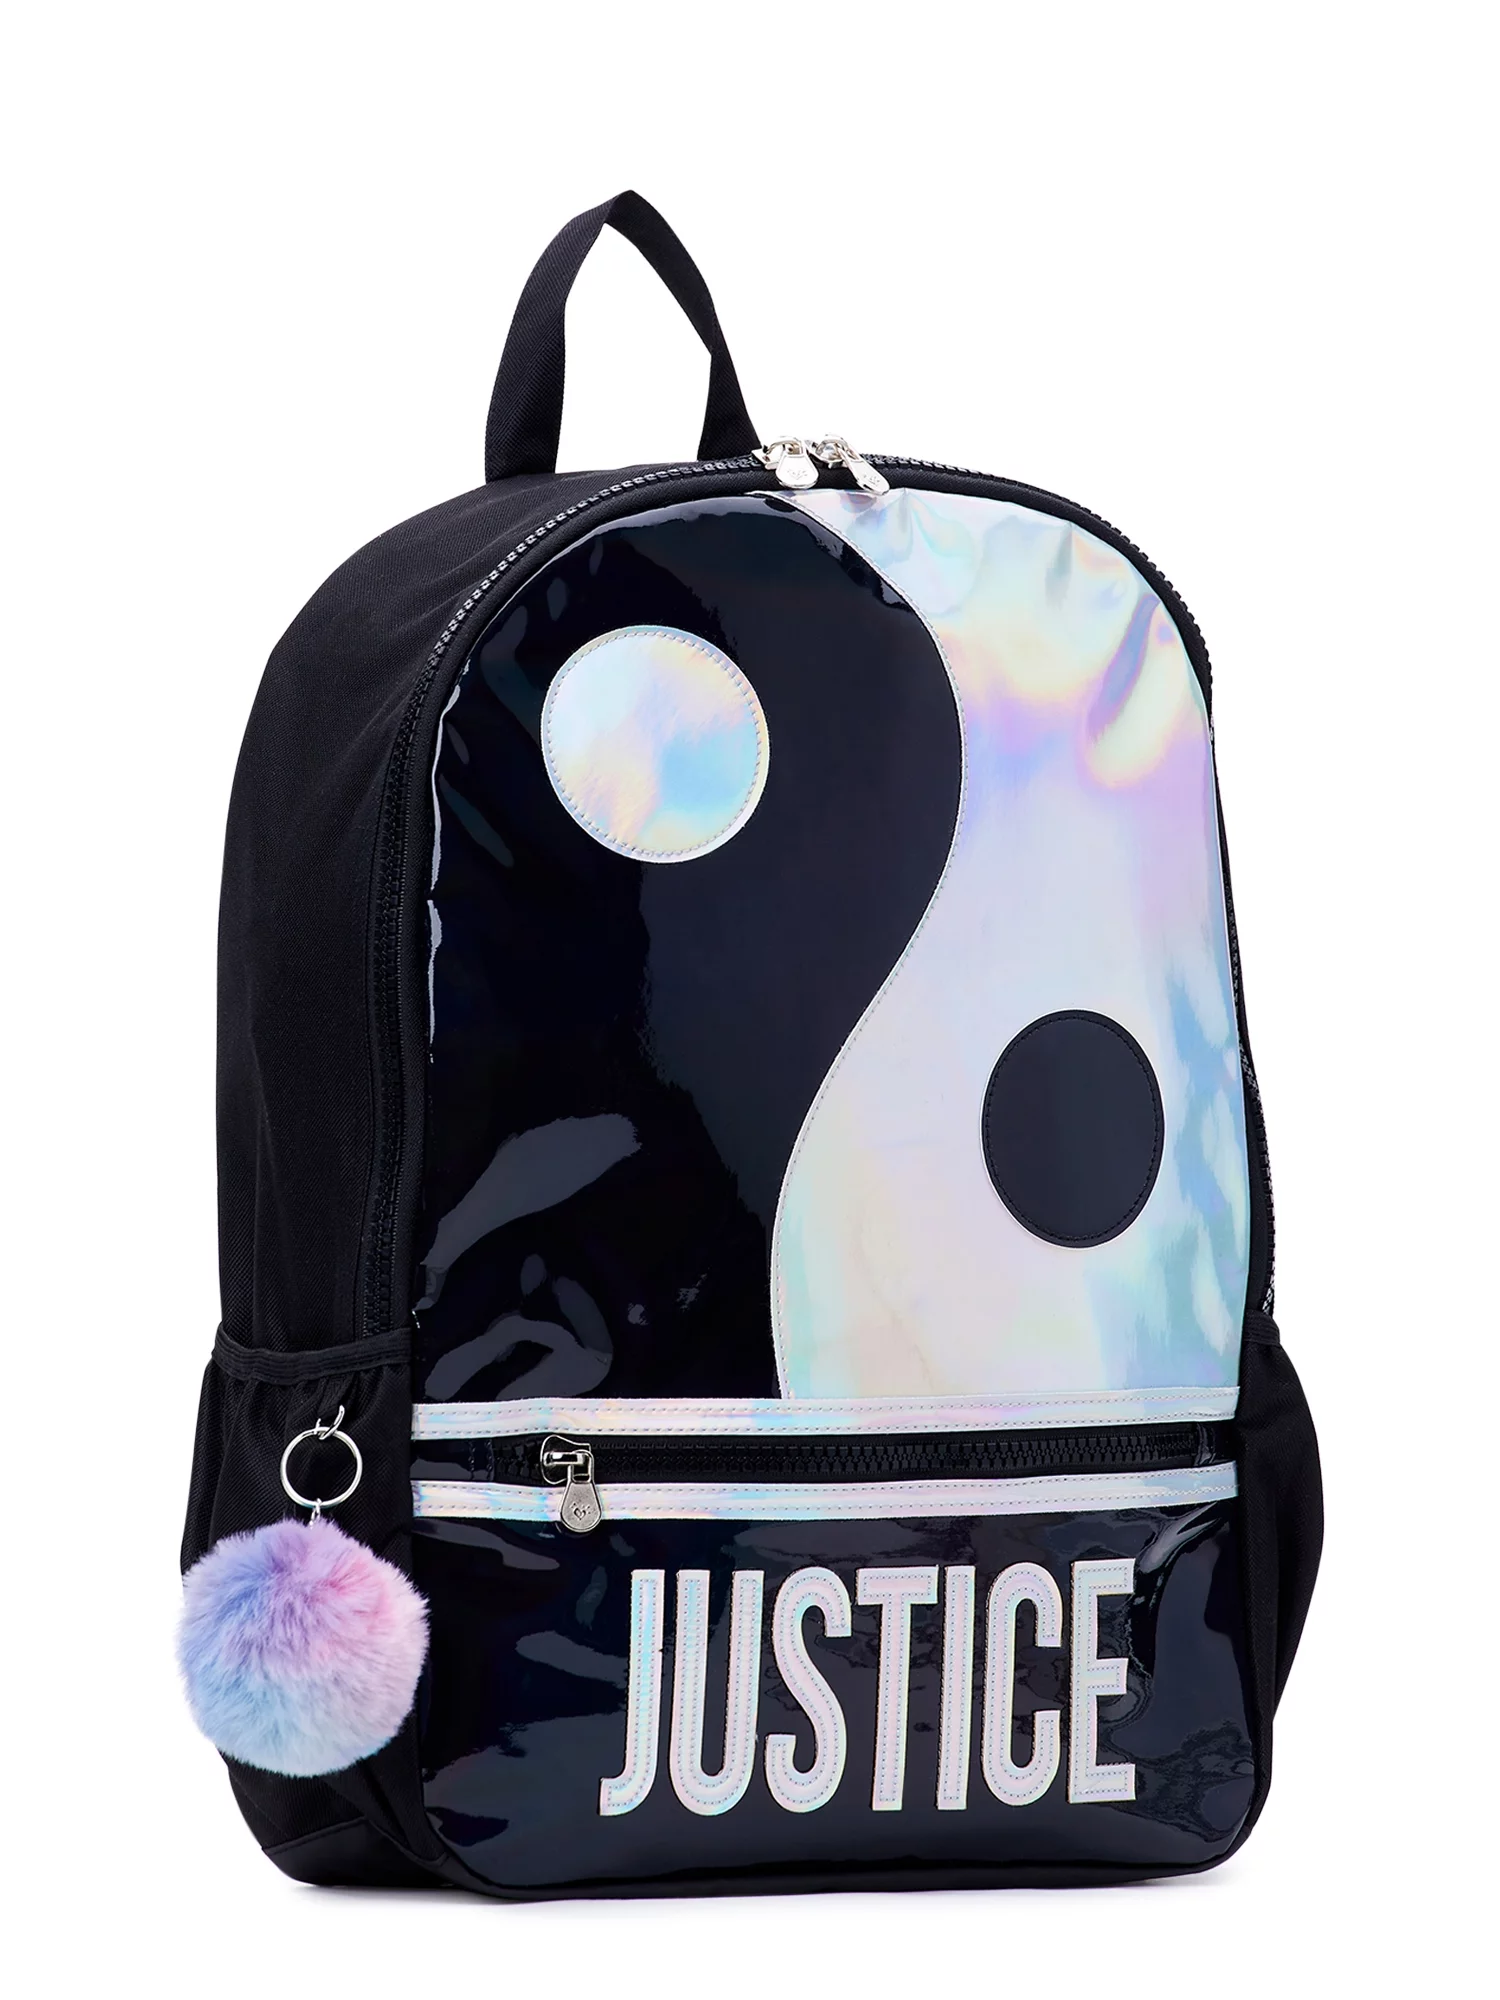 Justice Girls 17" Laptop Backpack with Pom Key Chain, Black Yin Yang